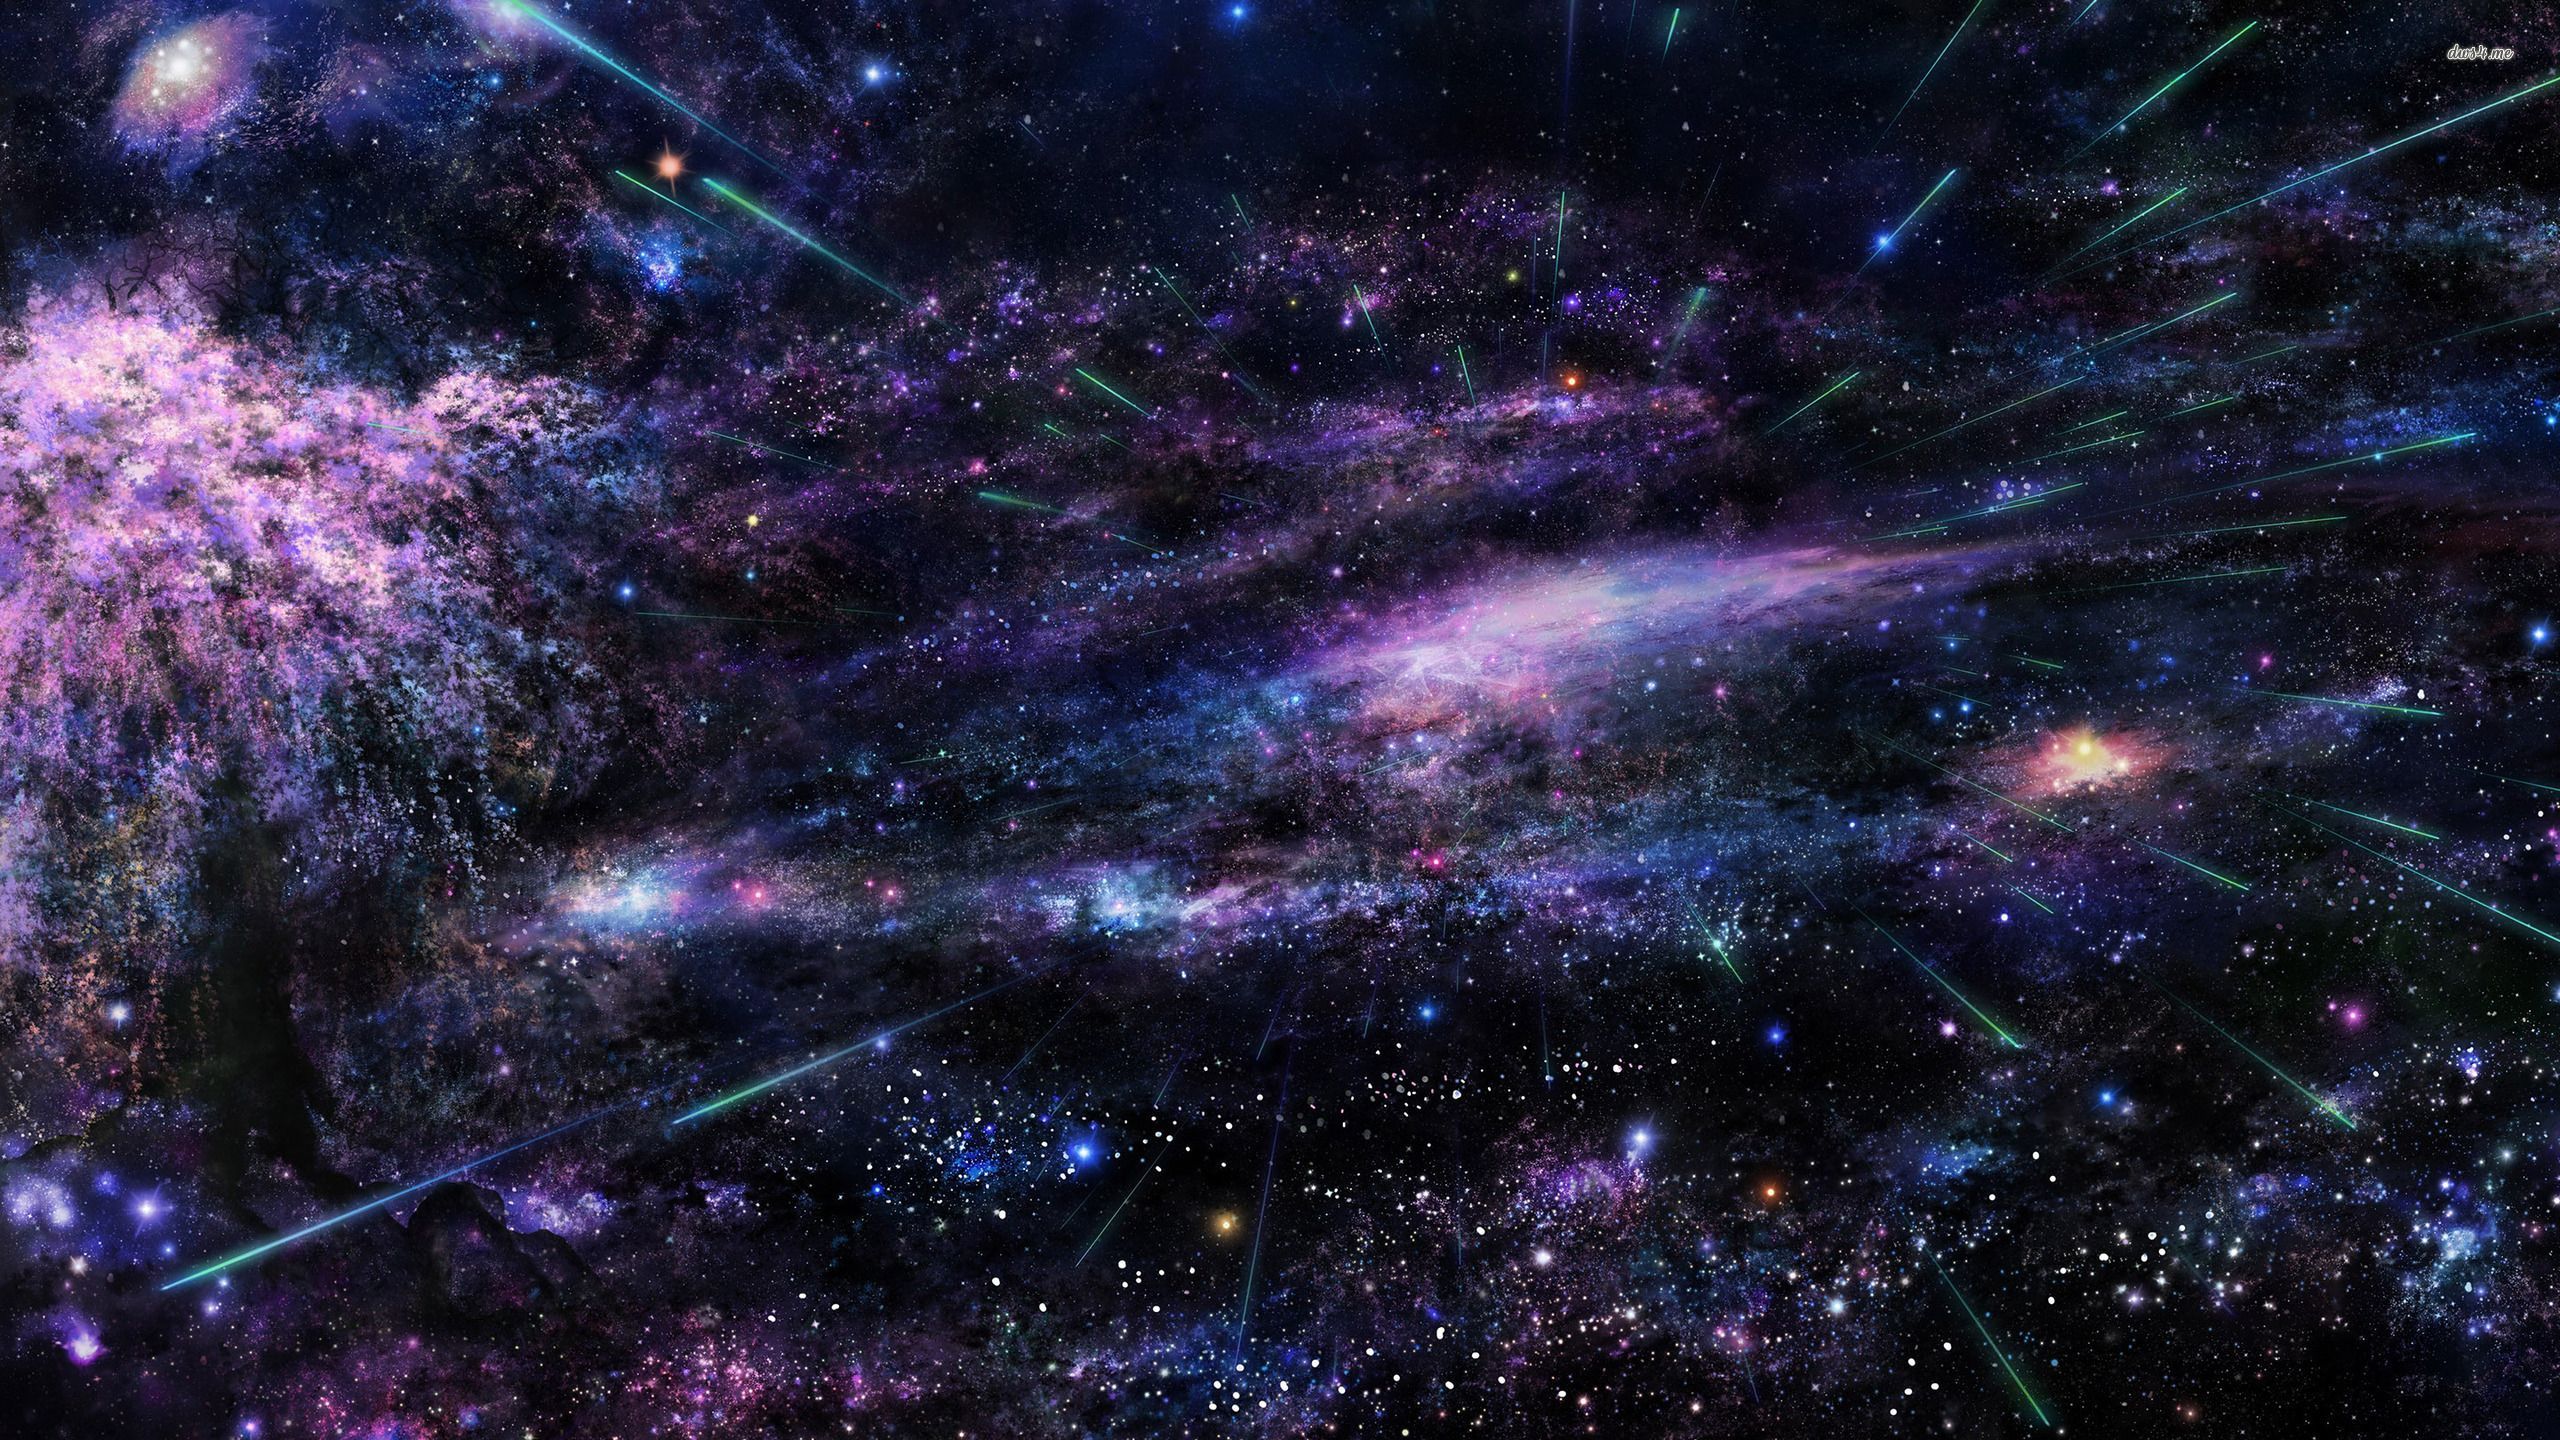 Universe wallpaper - Space wallpapers - #19215